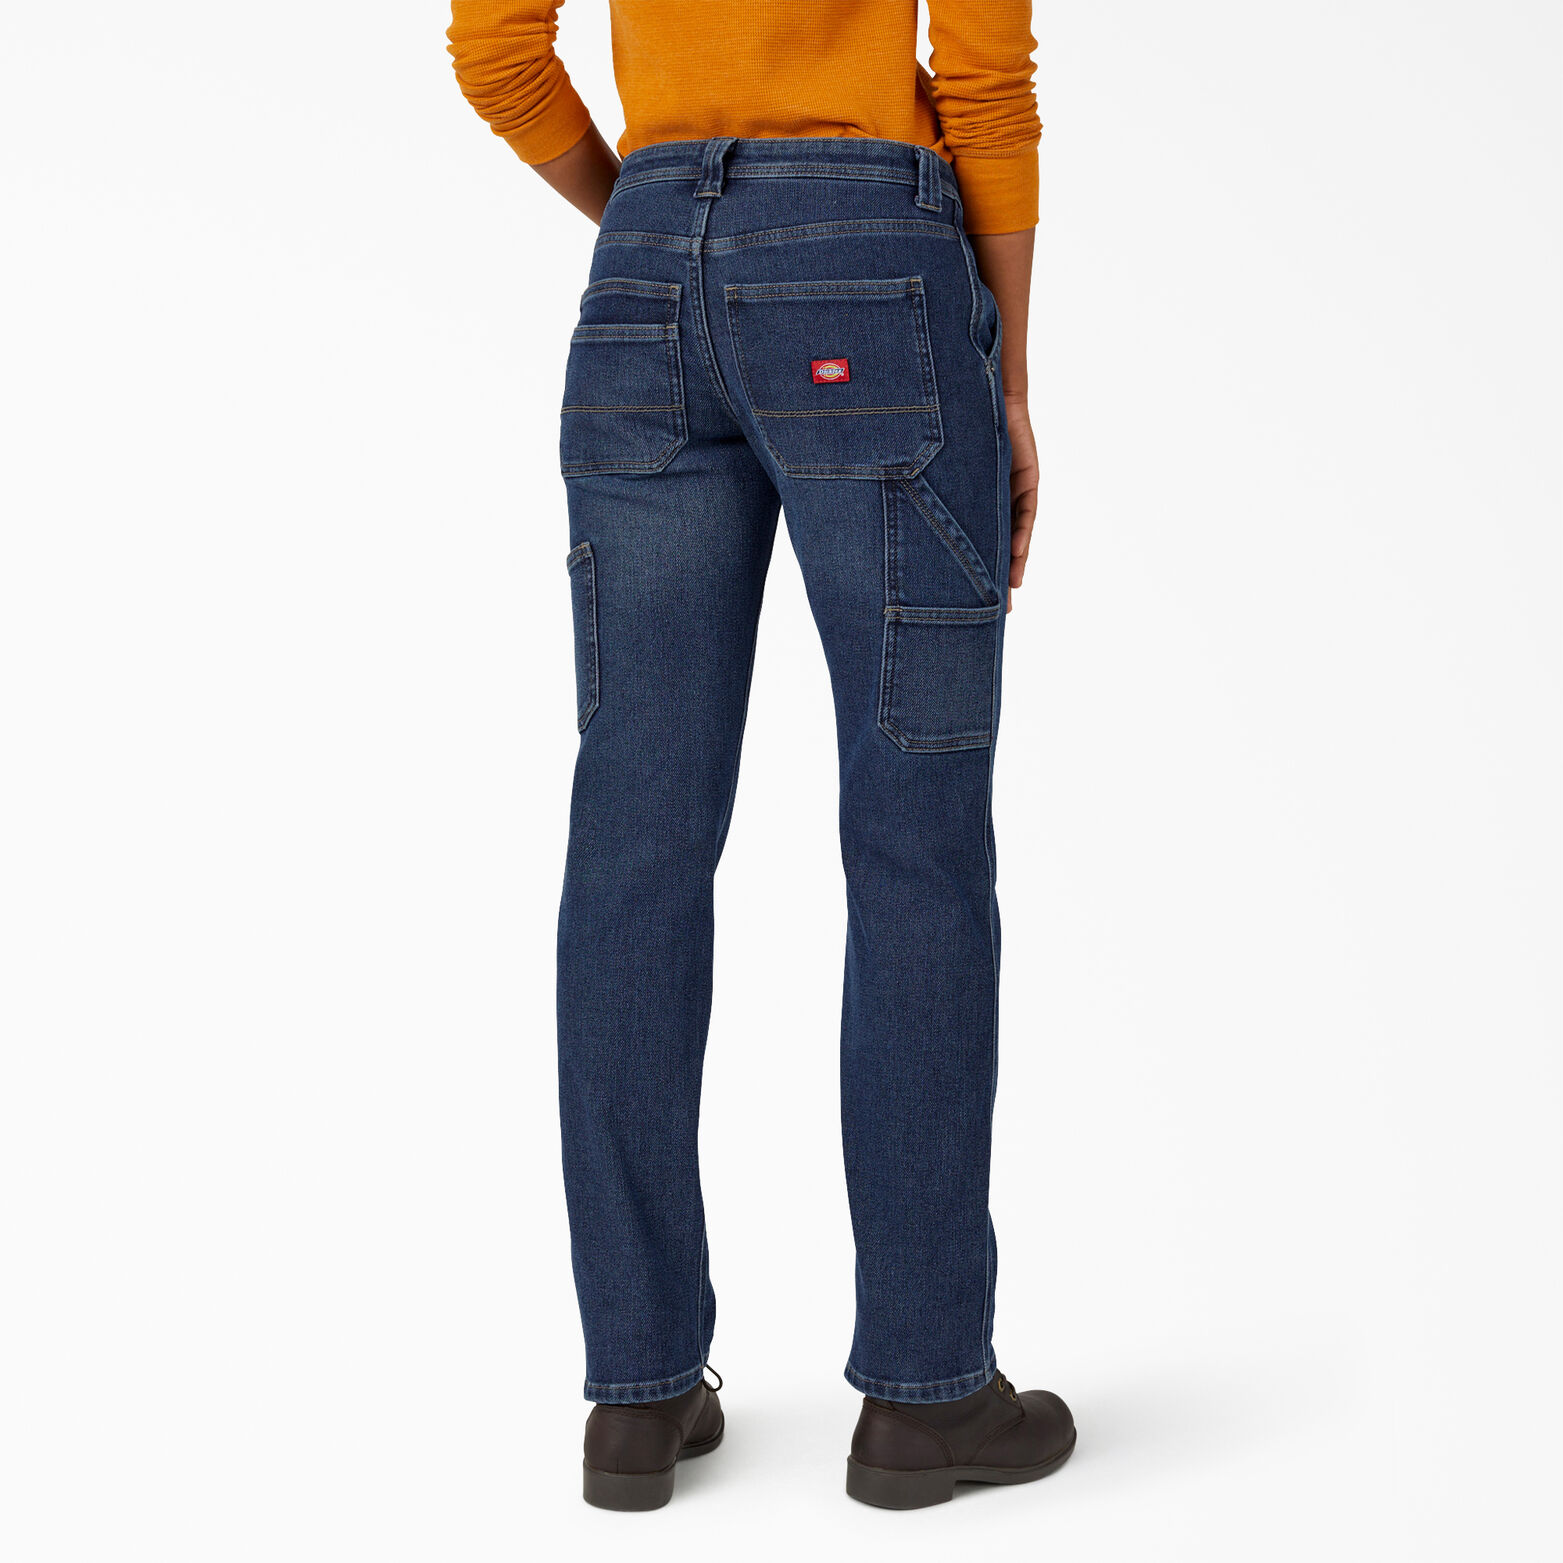 Women's Lined Relaxed Fit Carpenter Jeans - Dickies